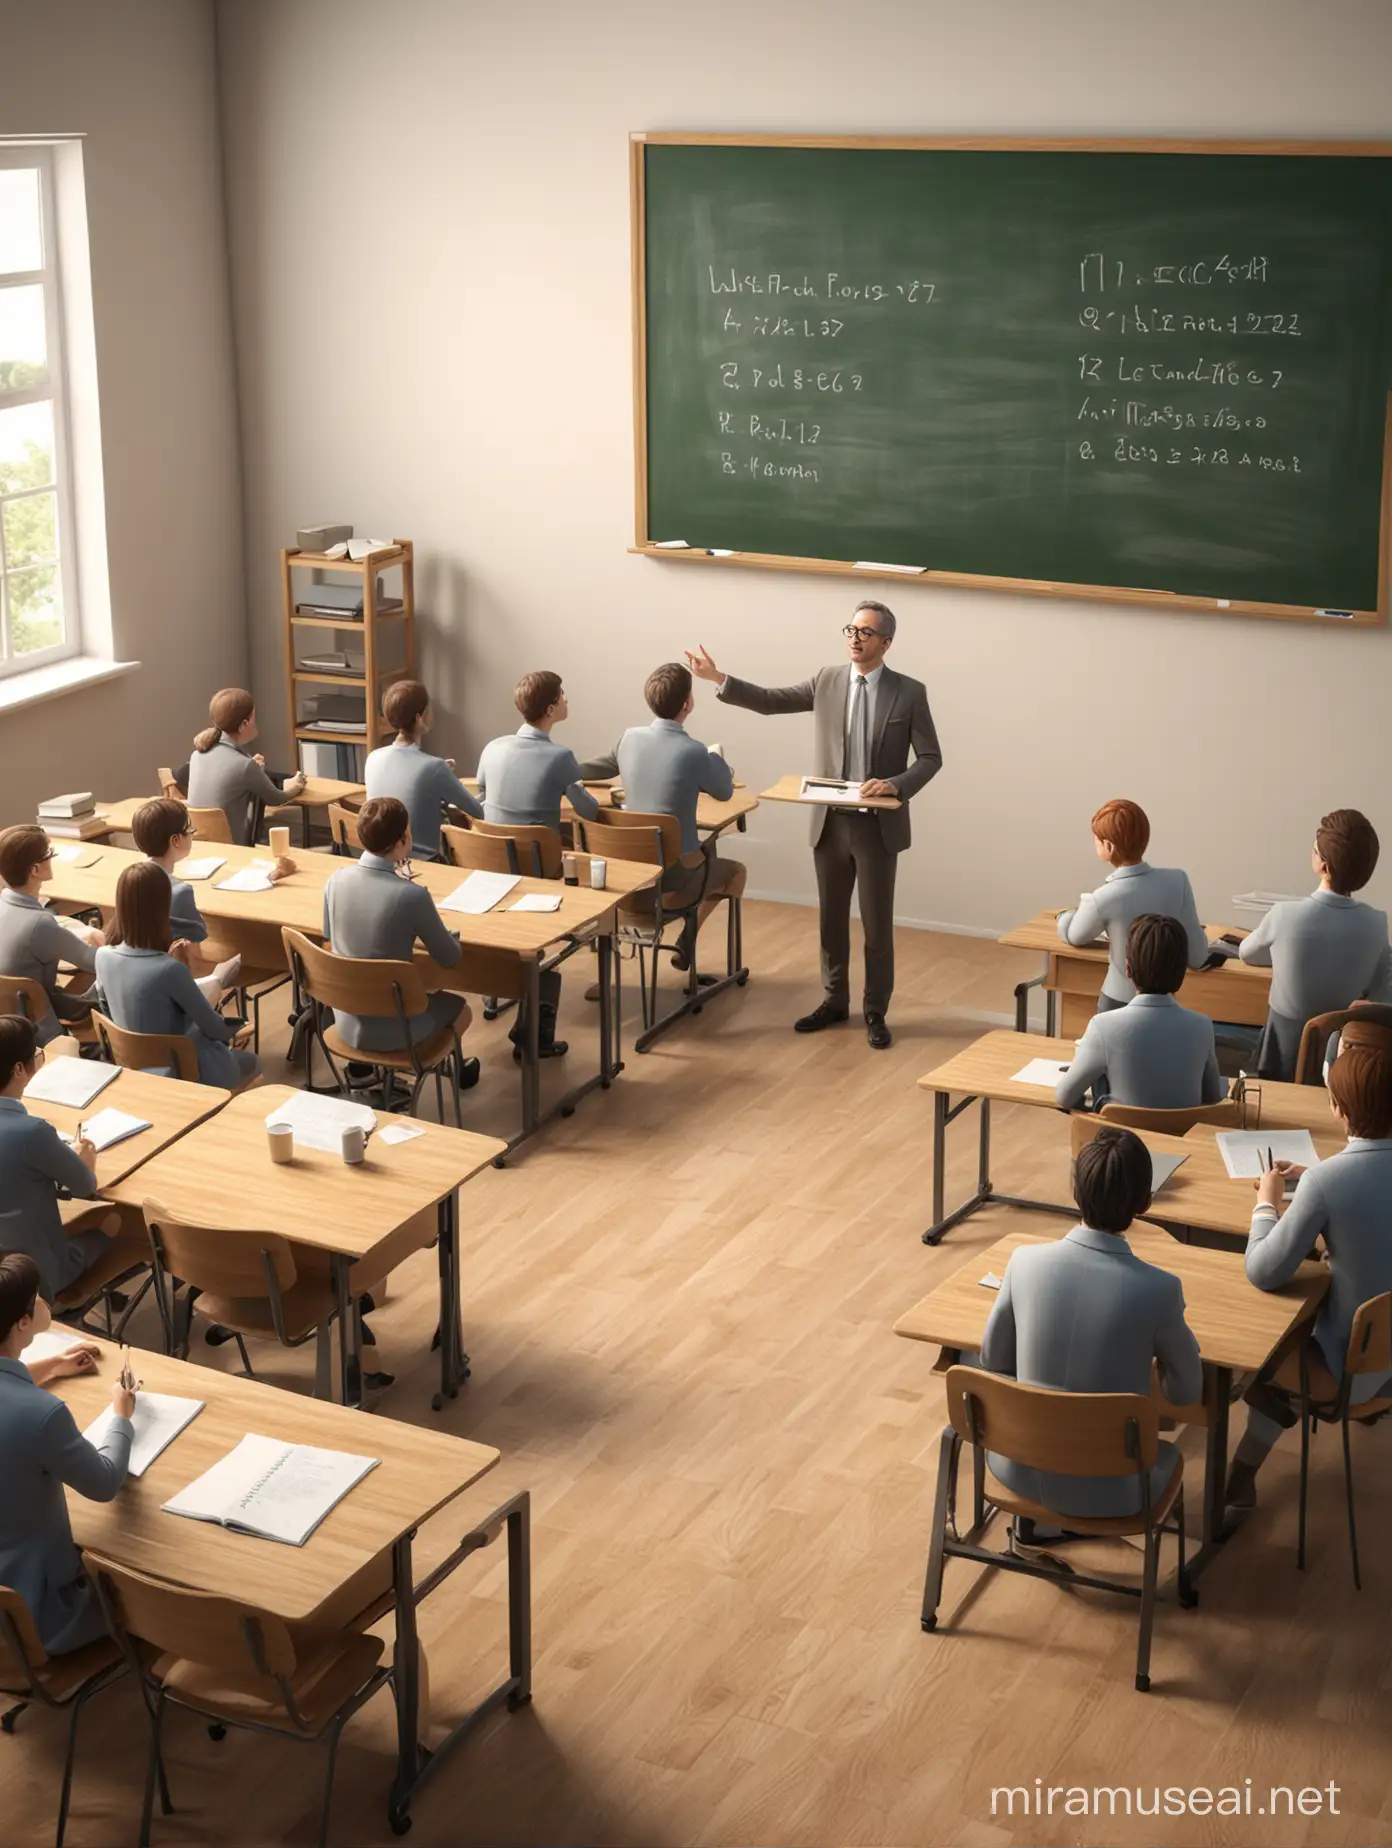 illustration of a lecturer teaching students in class, there is a blackboard on the table. The lecturer stood explaining the lecture material while the students sat in chairs complete with tables. 3d images, good image quality, high resolution